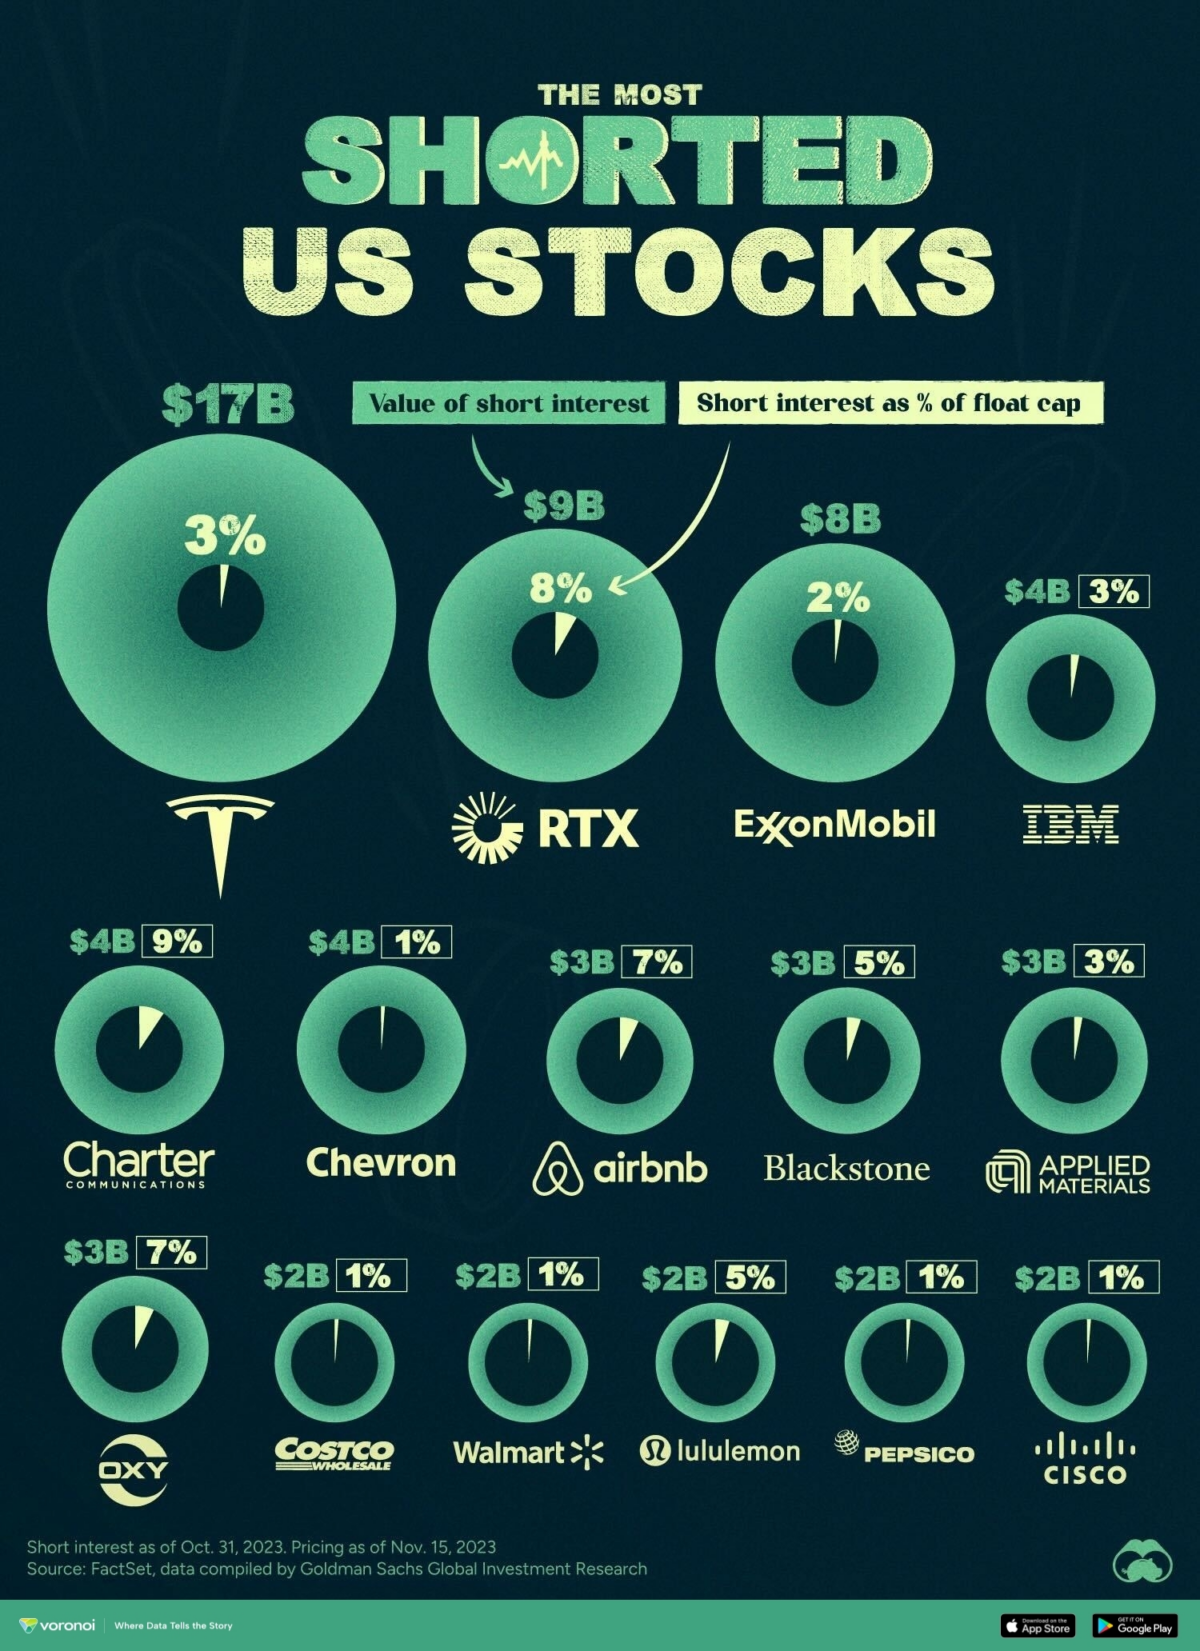 The Most Shorted U.S. Stocks in 2023